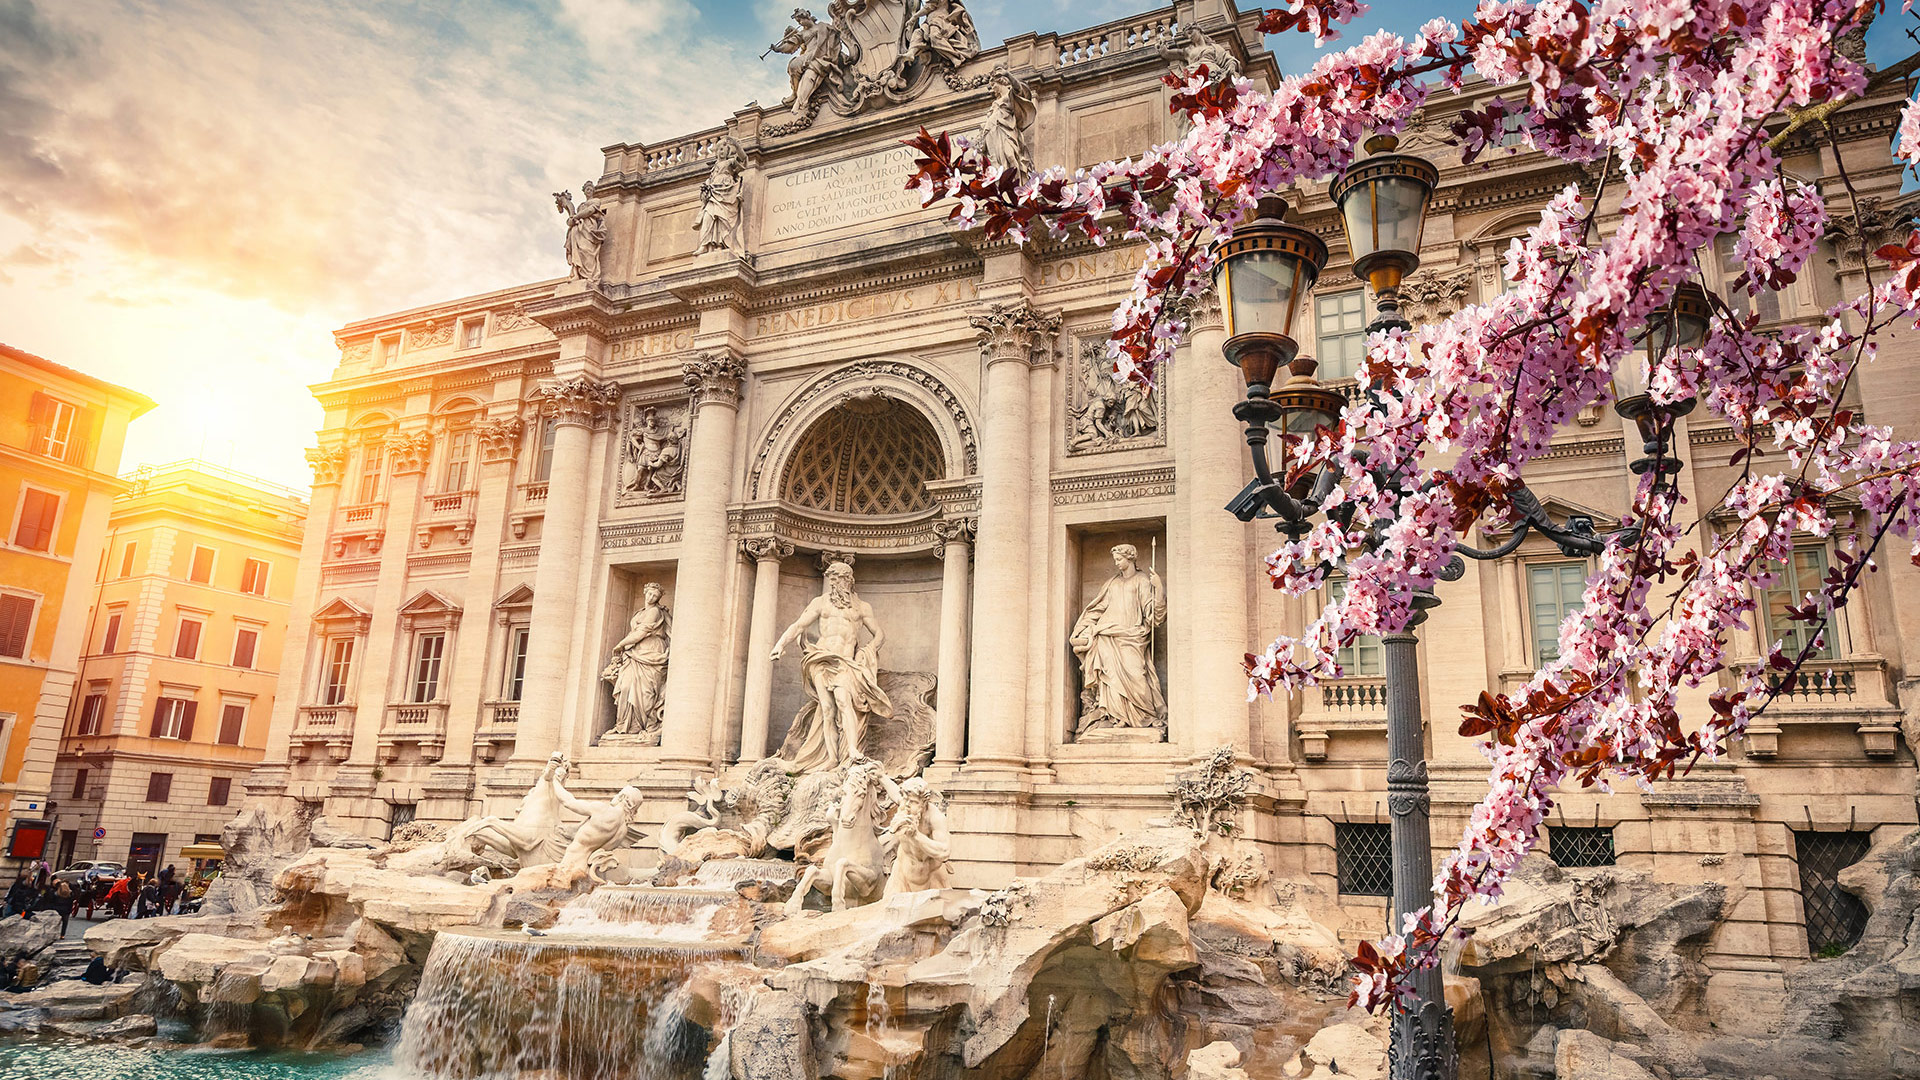 Book Direct Sale: Get a Free Night this April in Italy!